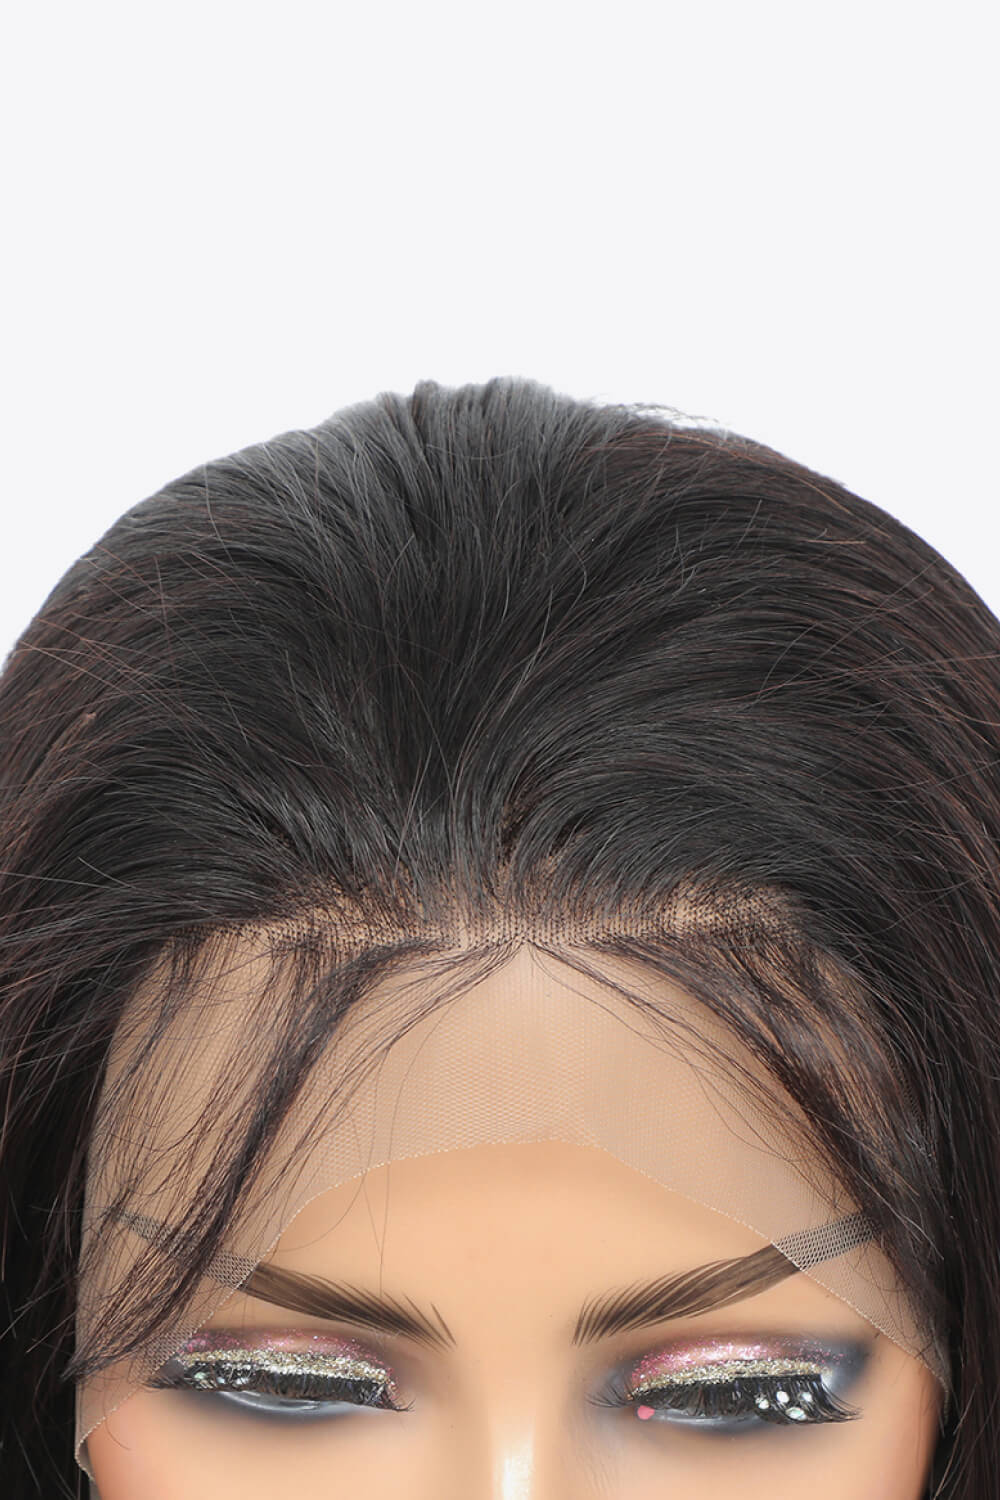 18" 13x4 Lace Front Wigs Virgin Hair Natural Color 150% Density - AllIn Computer